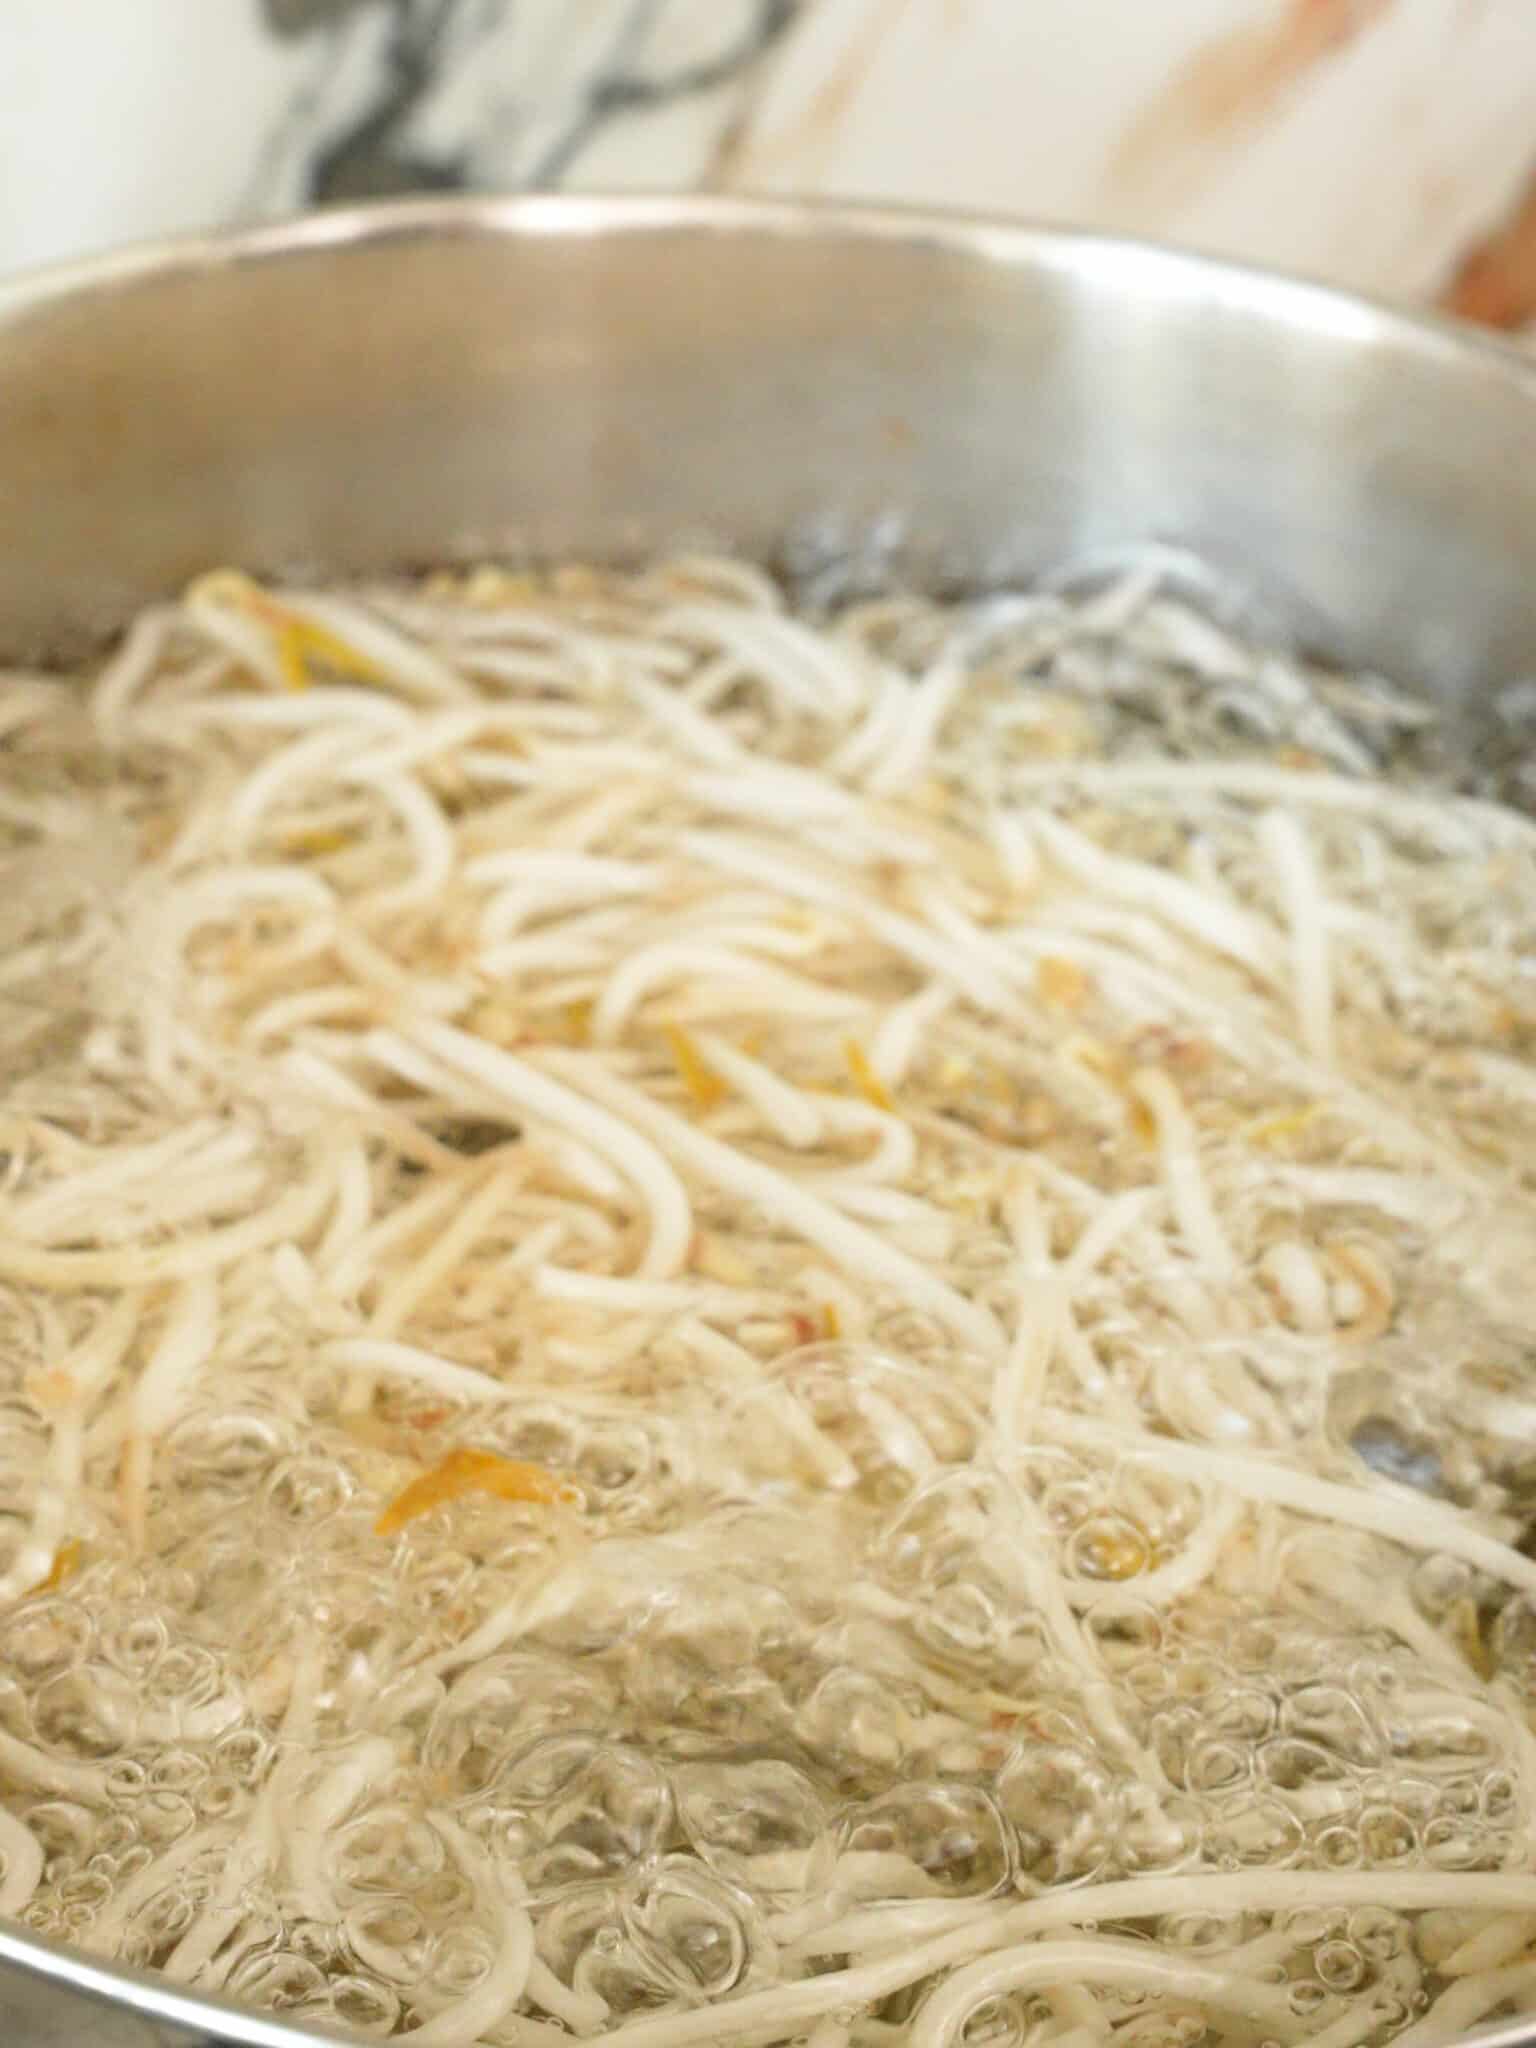 Bean Sprouts being blanched in boiling water.